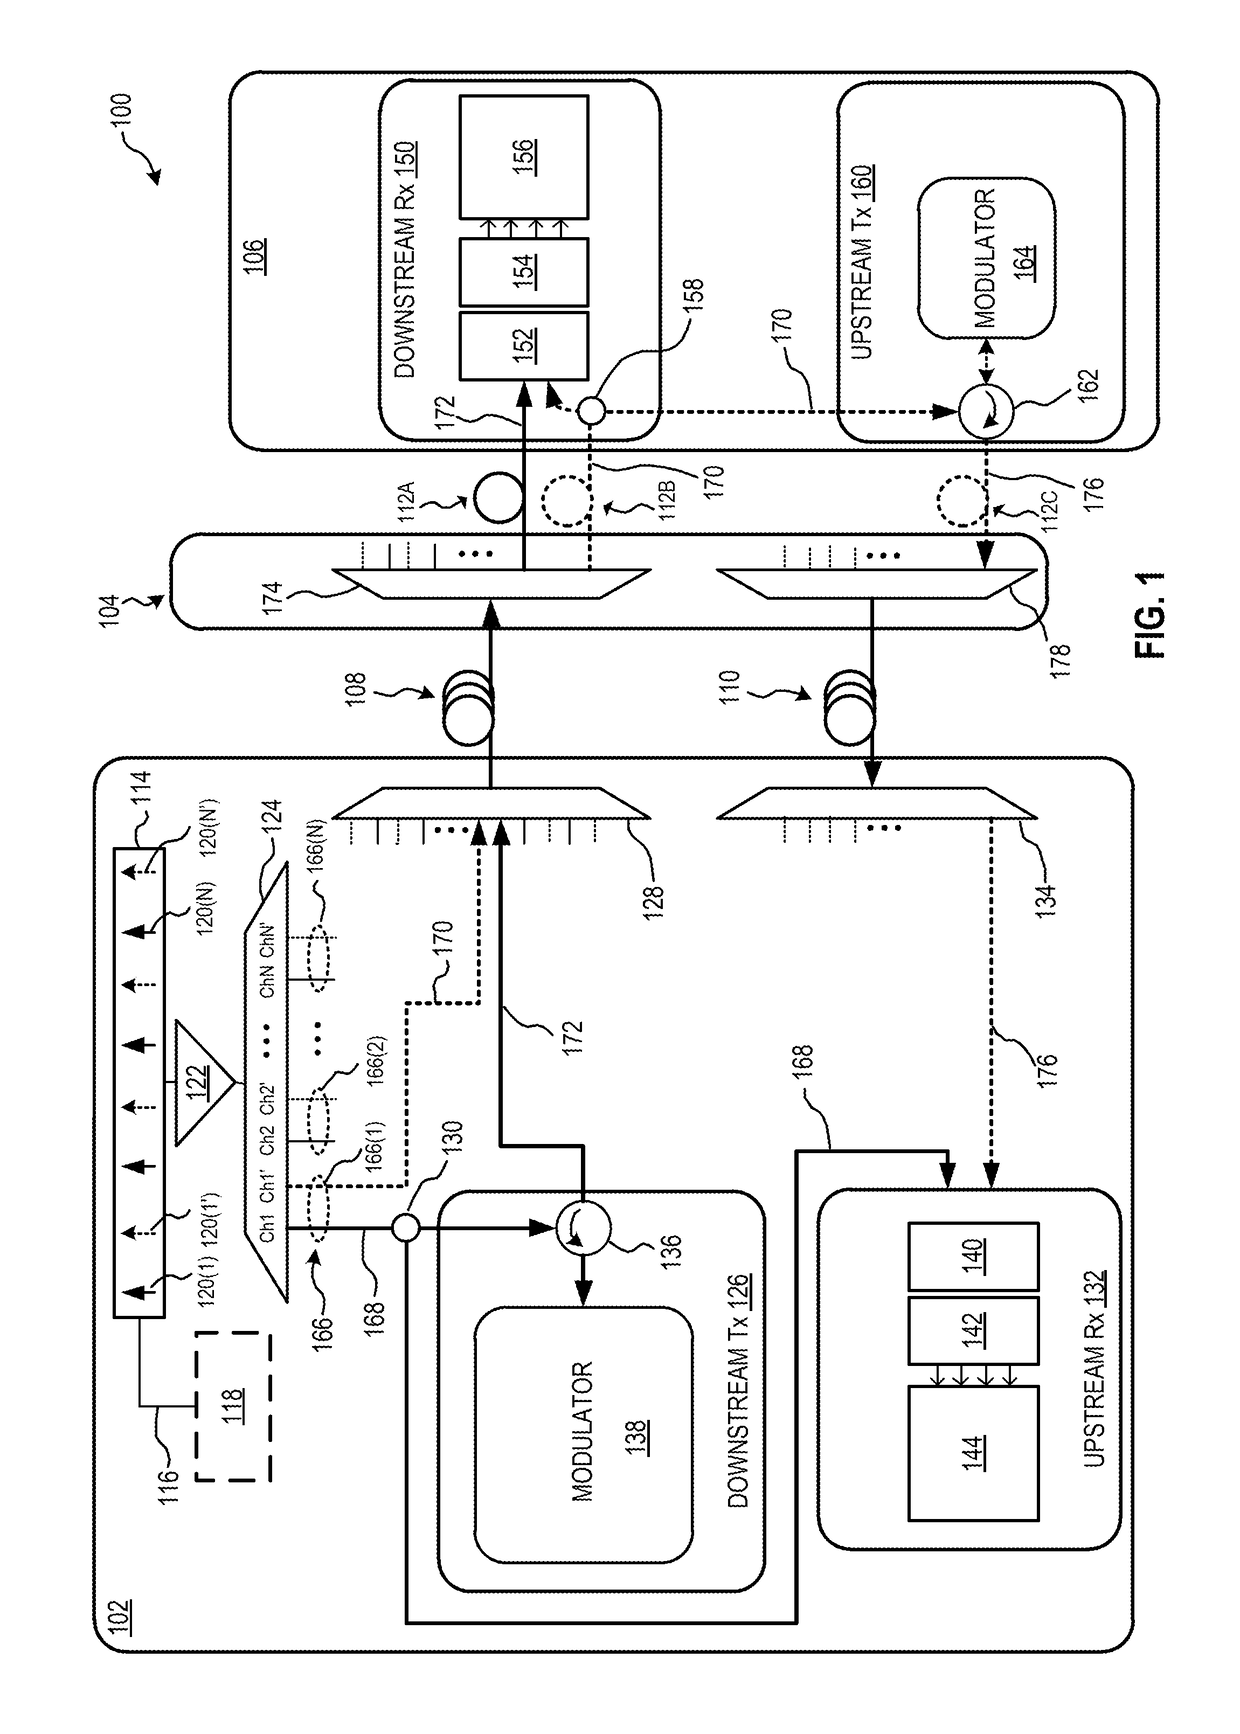 Fiber communication systems and methods